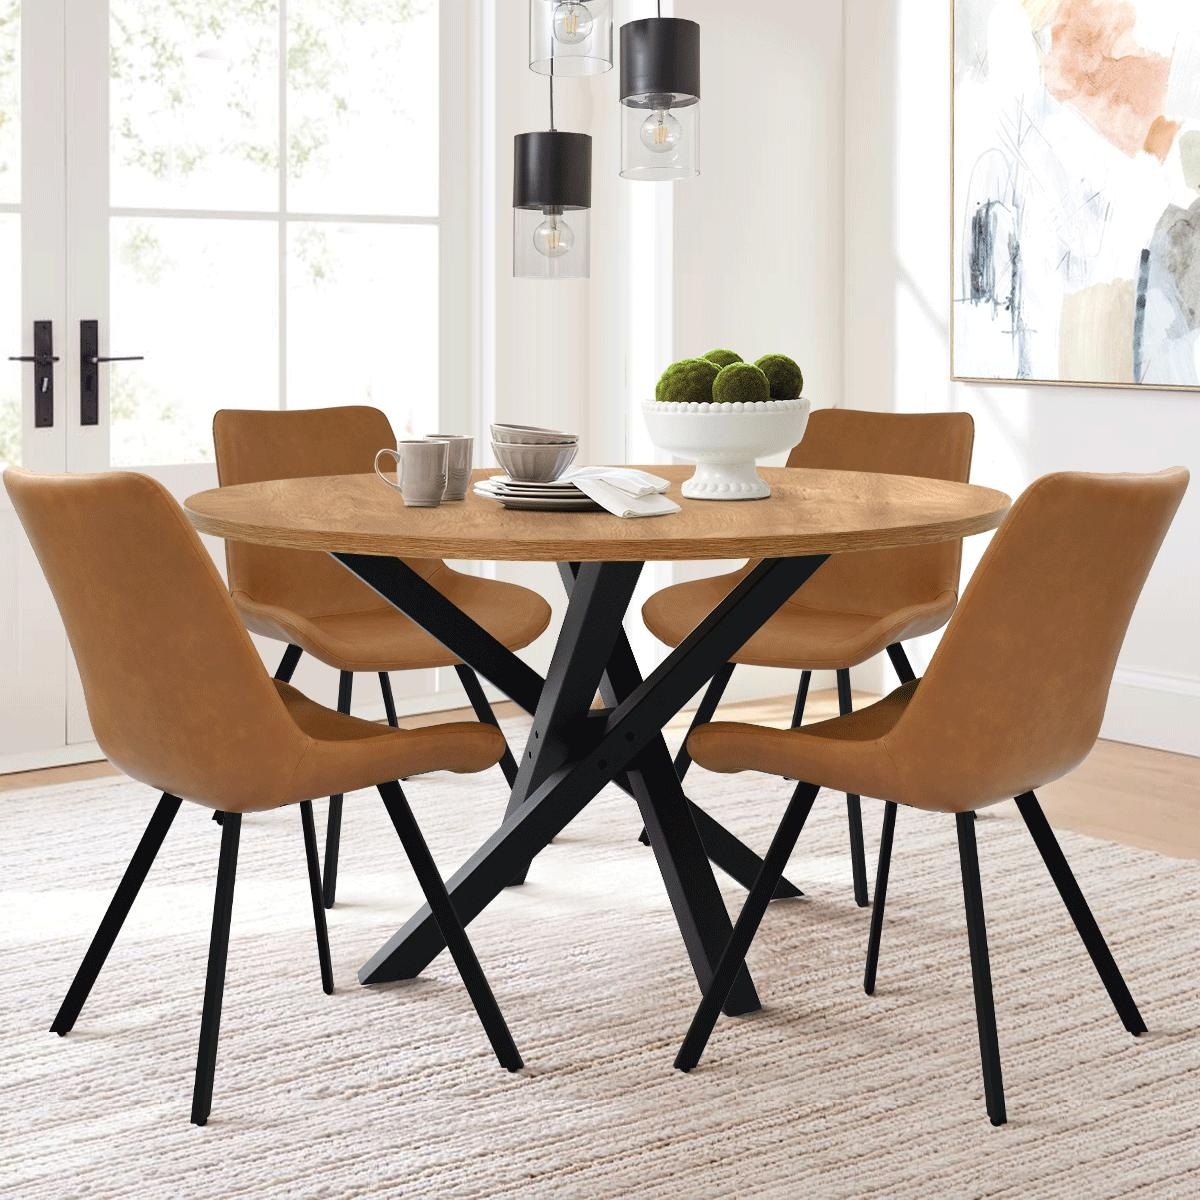 https://ak1.ostkcdn.com/images/products/is/images/direct/ad451835c409f7dba9c4e3c18efc8ebc4c572c31/Dining-Chairs-Set-of-4-with-Soft-Cushion%2C-PU-Desk-Chair.jpg